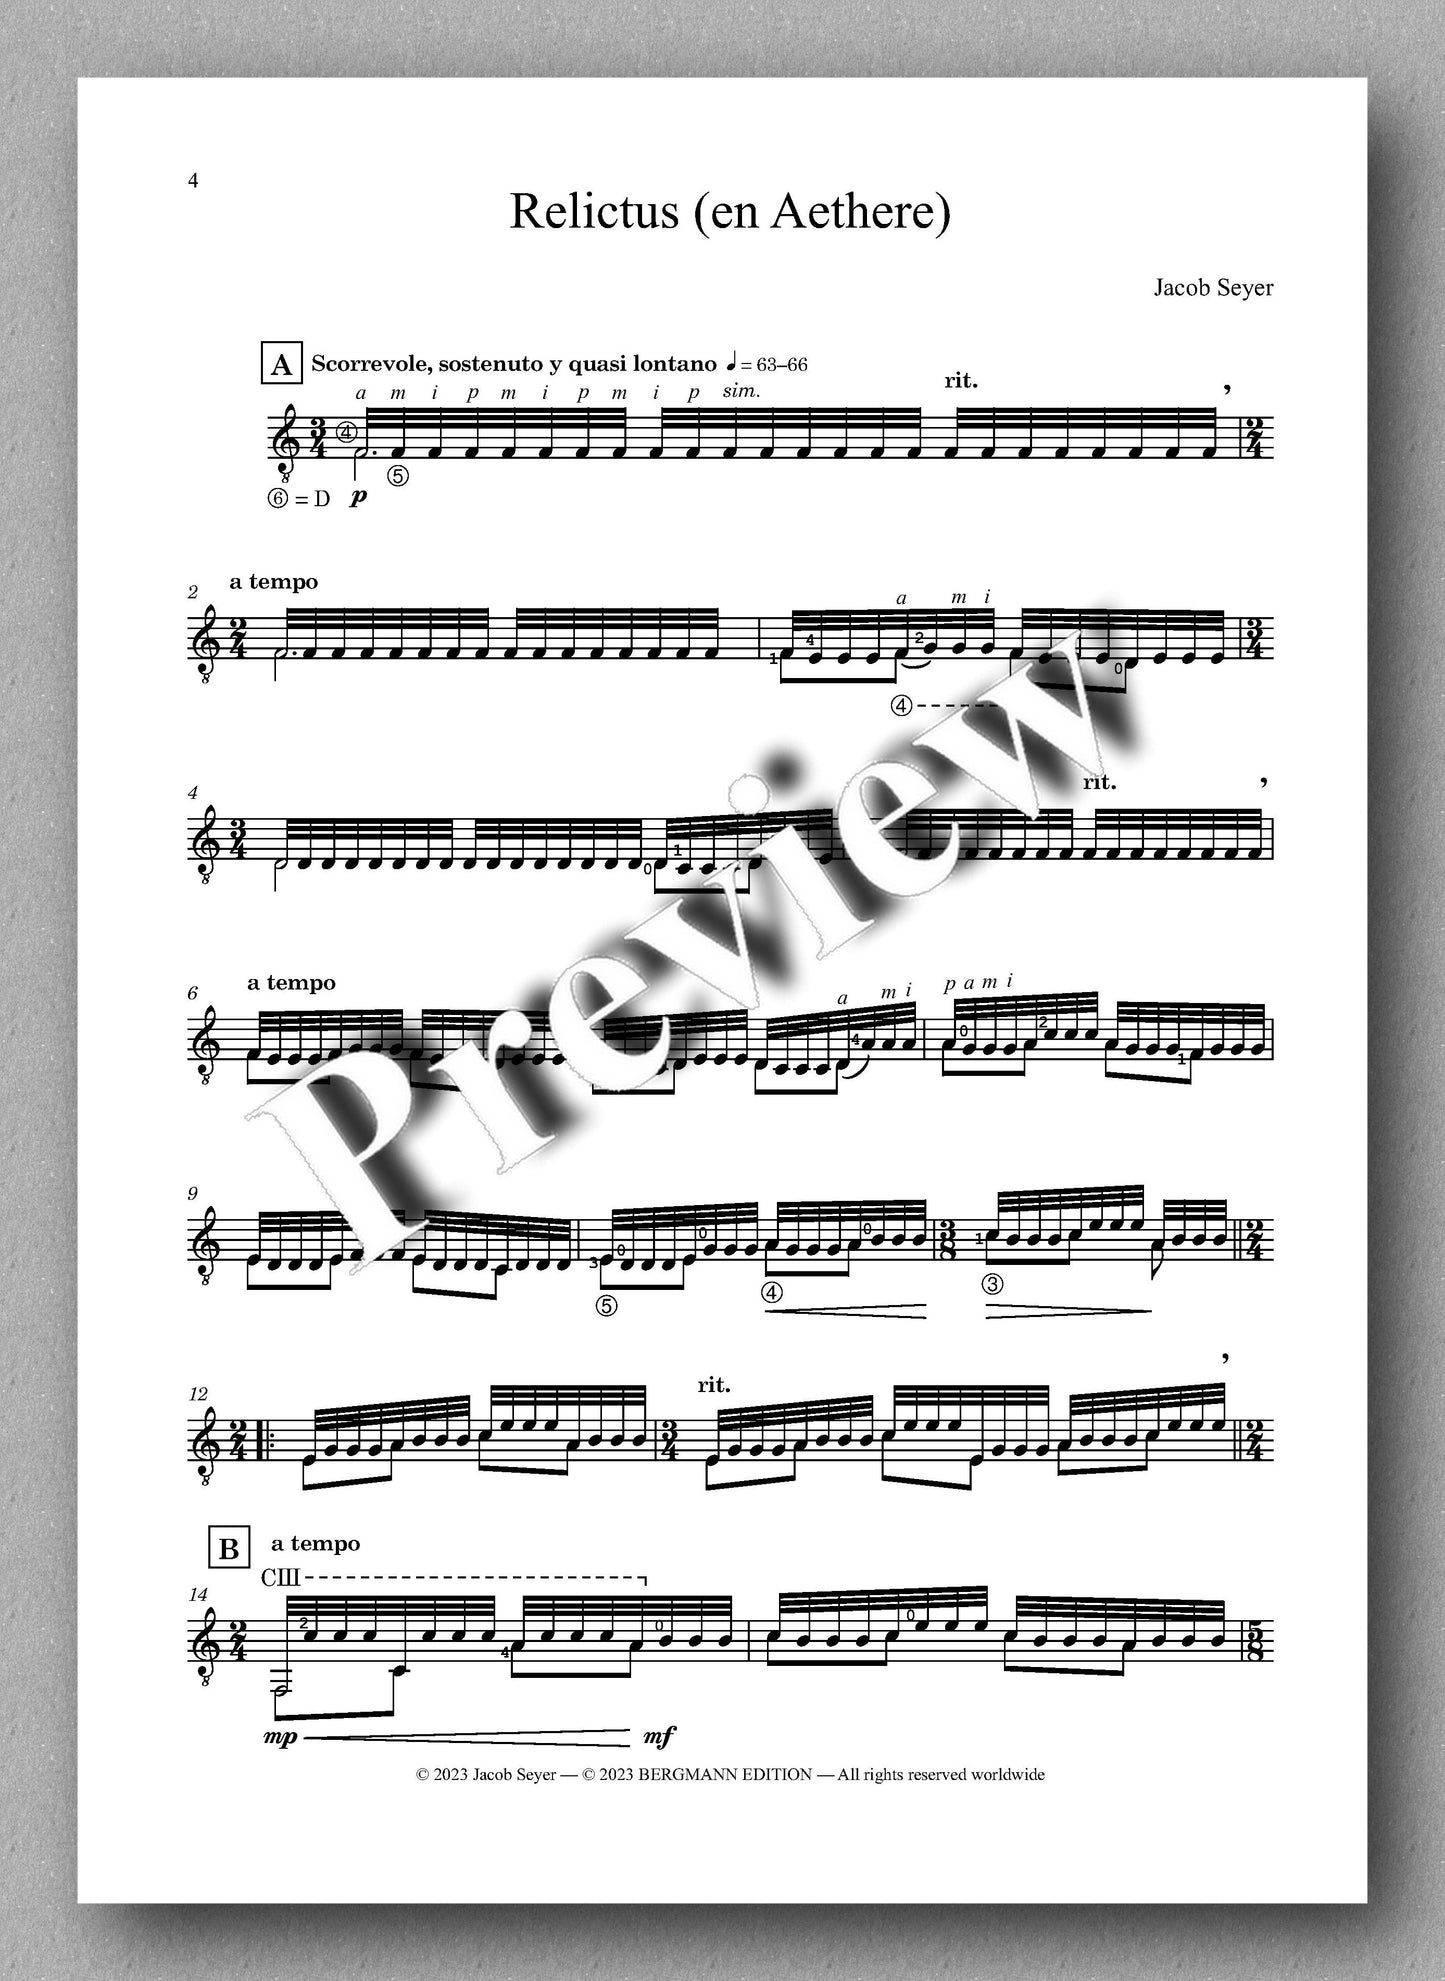 Jacob Seyer, Relictus (en Aethere) - preview of the music score 1